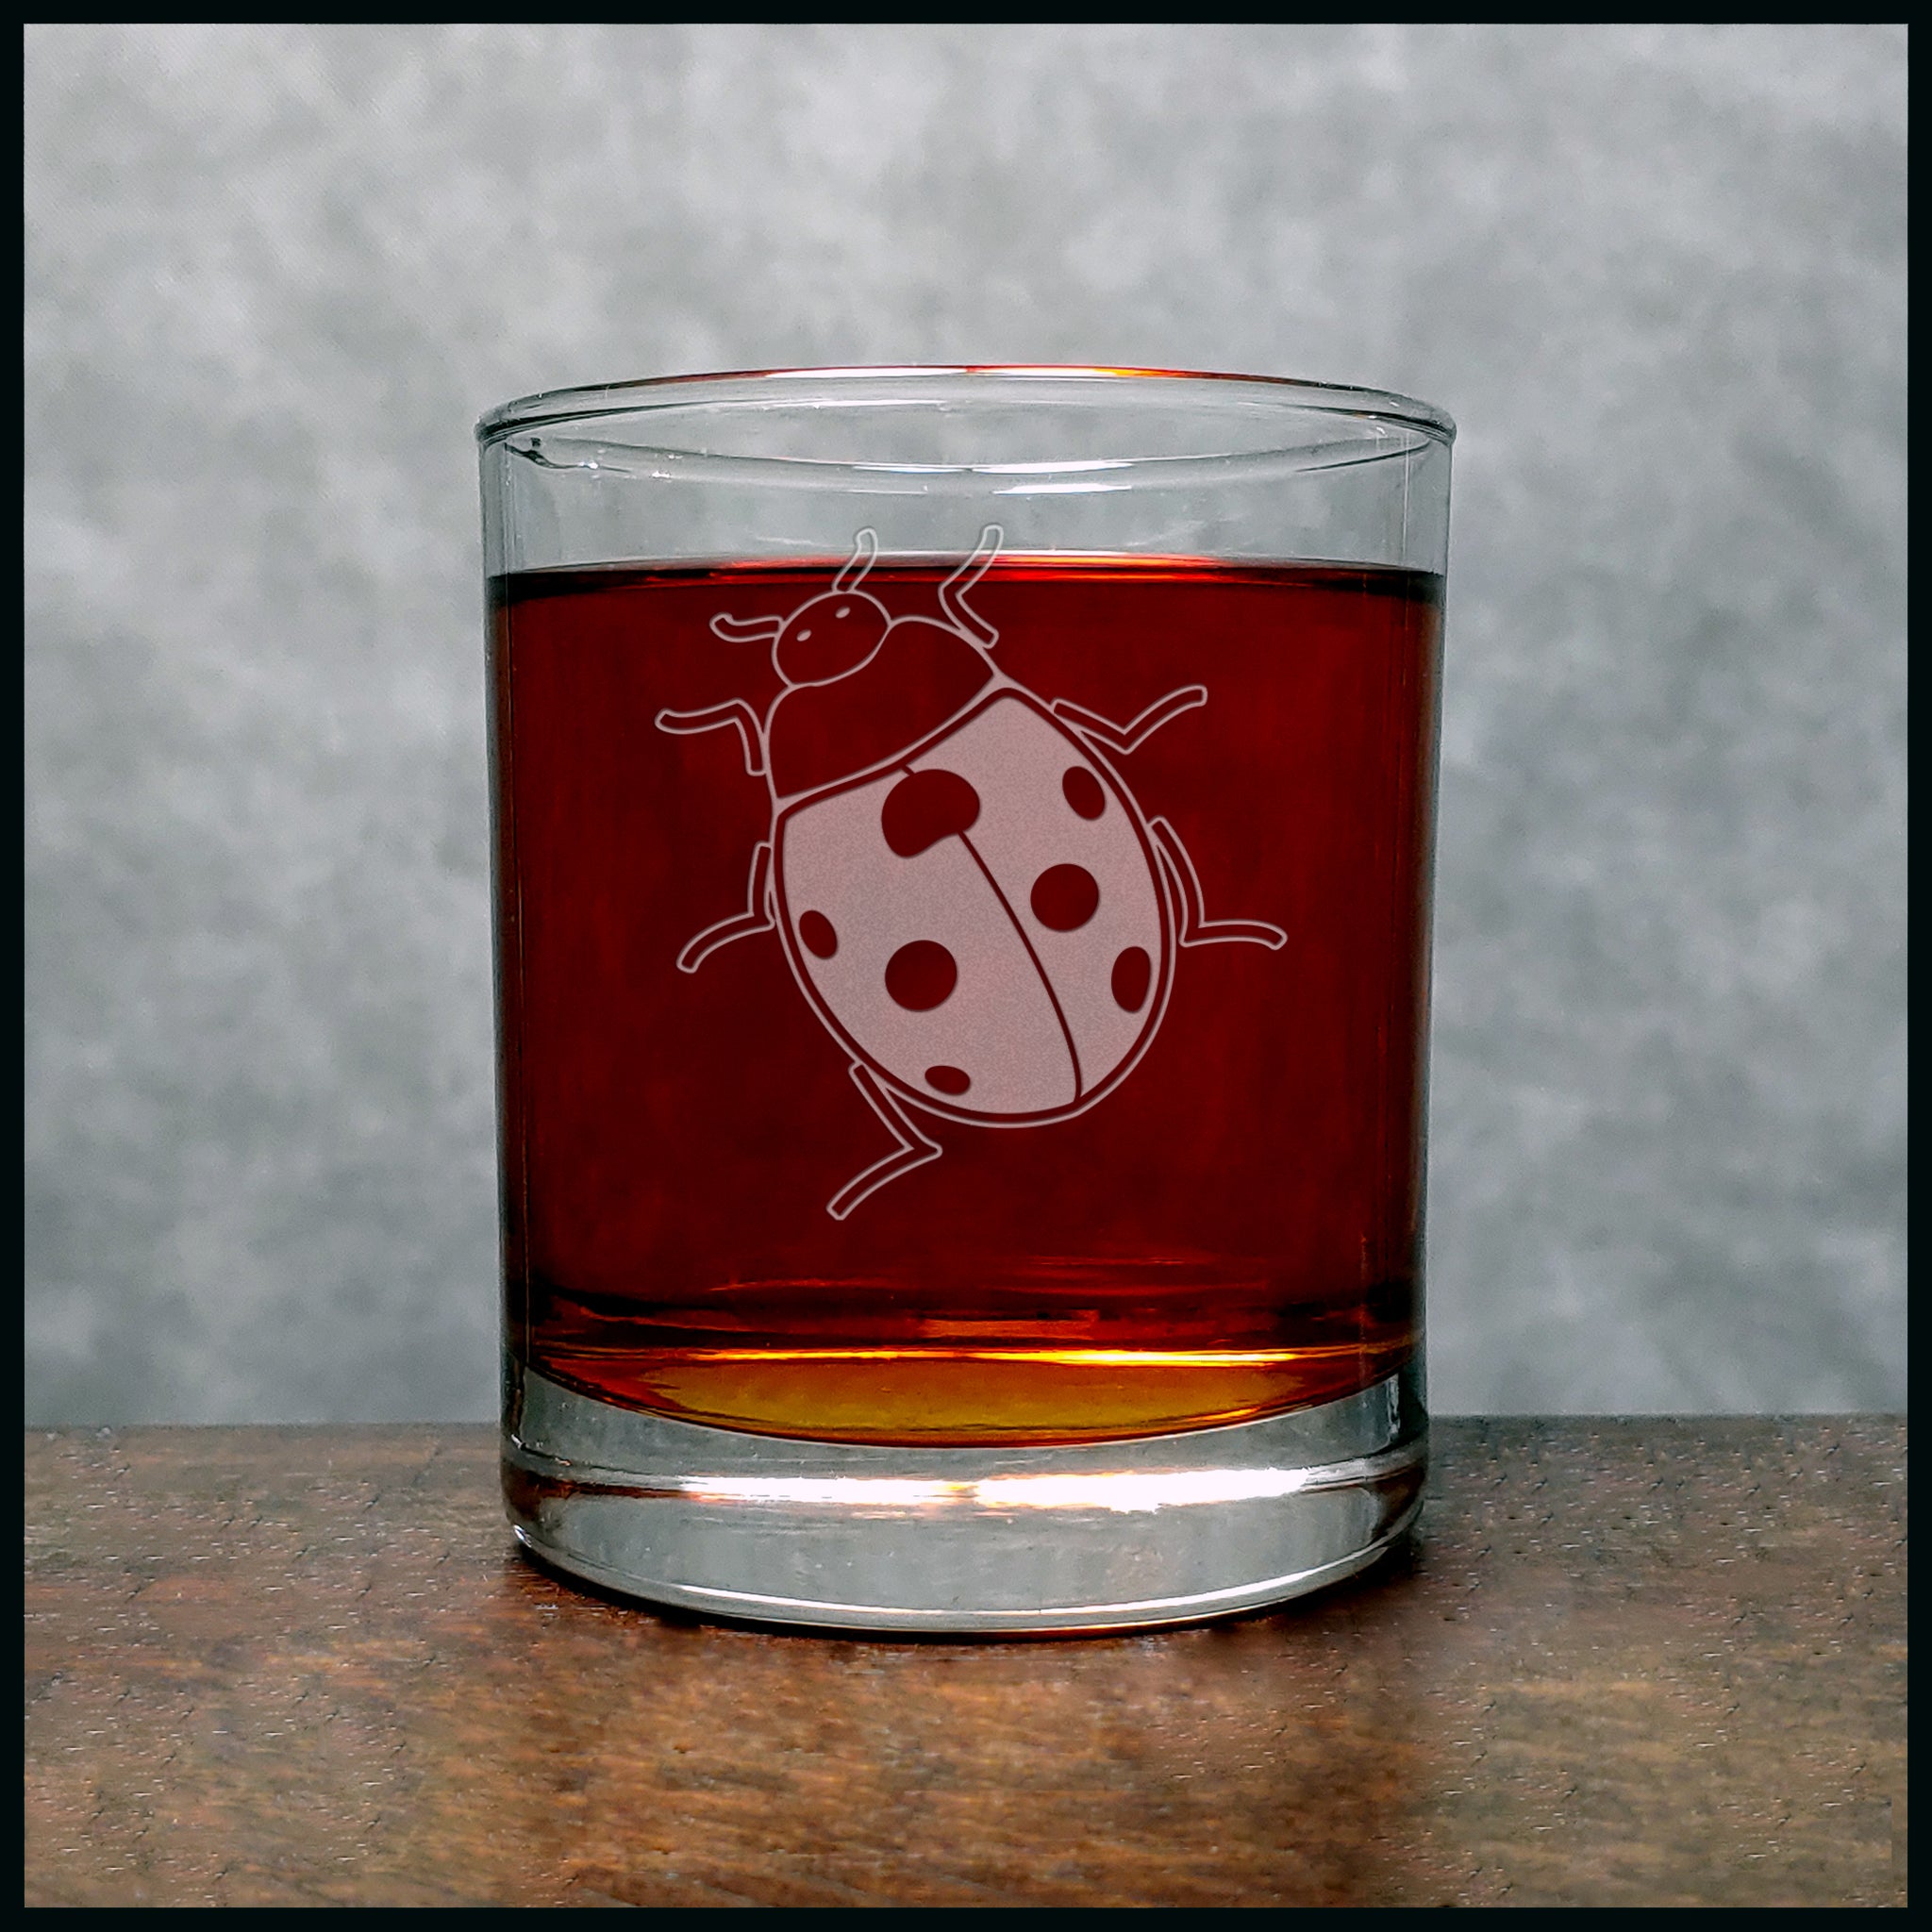 Ladybug Personalized Whisky Glass - Design 2 - Copyright Hues in Glass